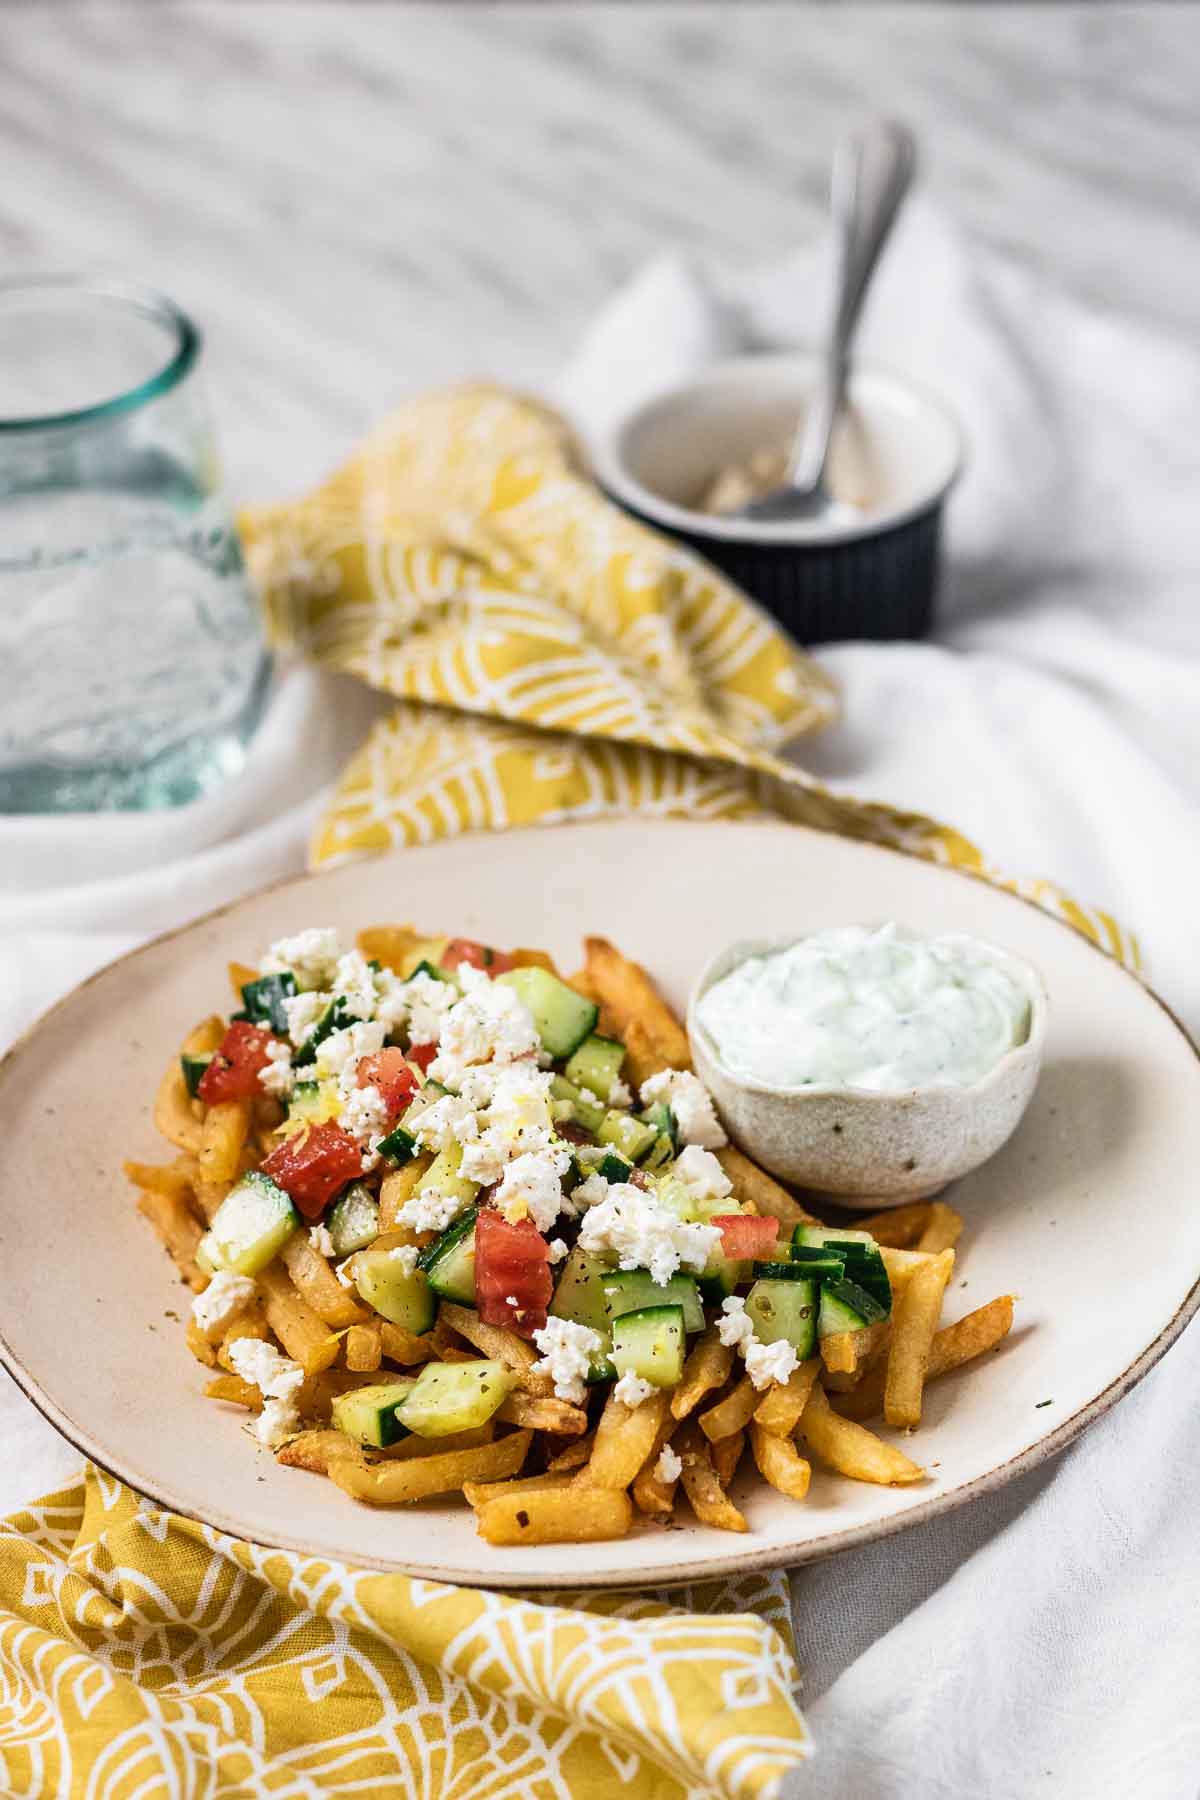 Fries on a plate topped with cucumber, tomato and feta cheese with a bowl of Tzatziki sauce.